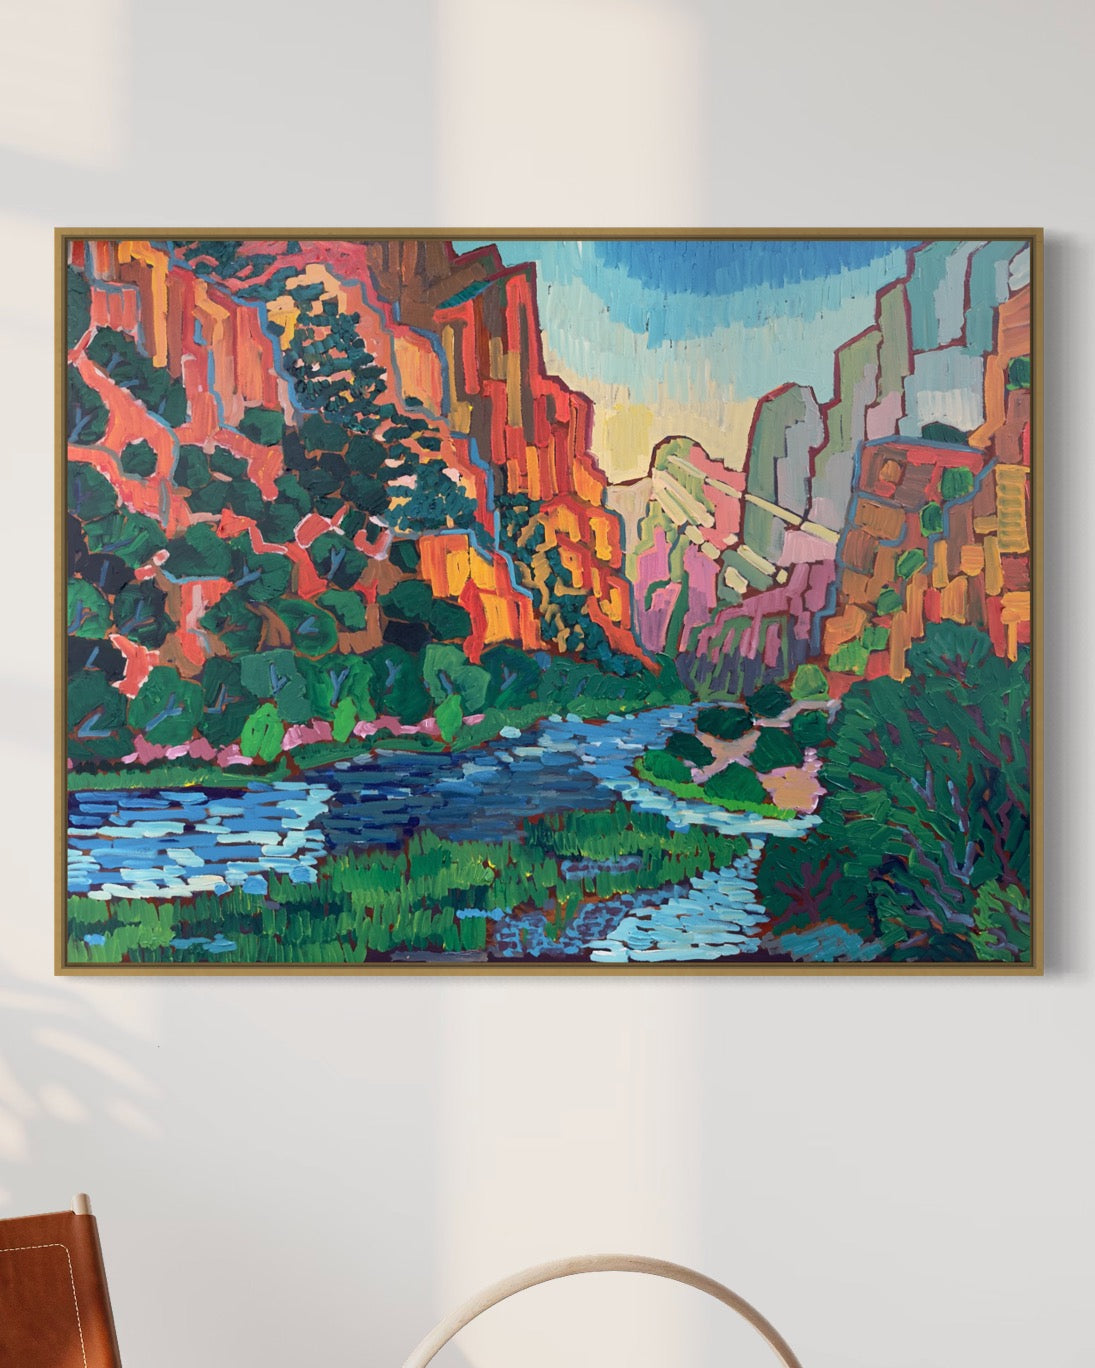 Black Canyon of the Gunnison National Park Print